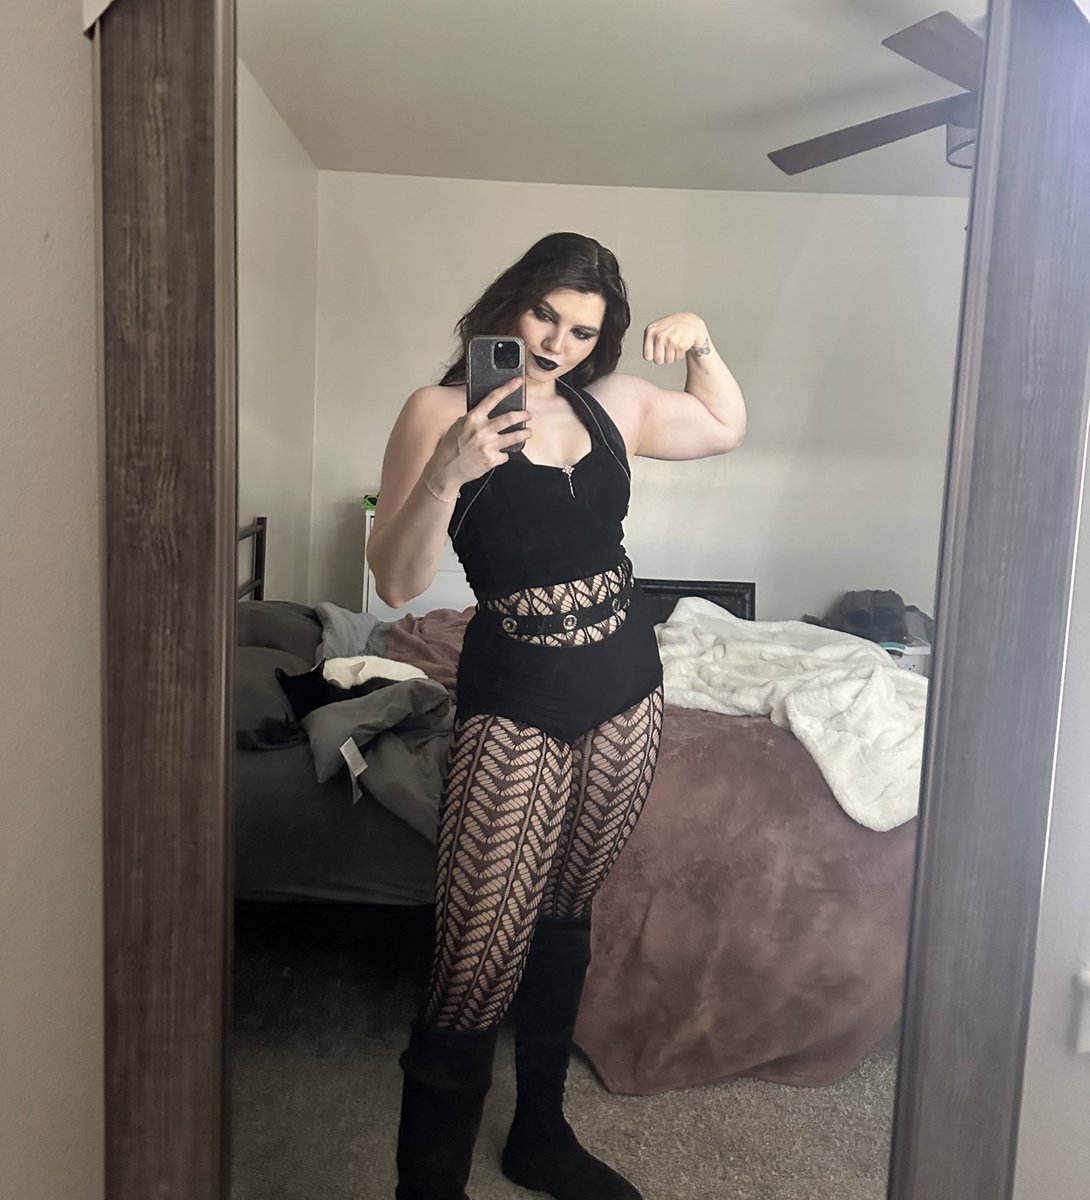 Workout stream today as MAMI (the one and only @RheaRipley_WWE ilysm)